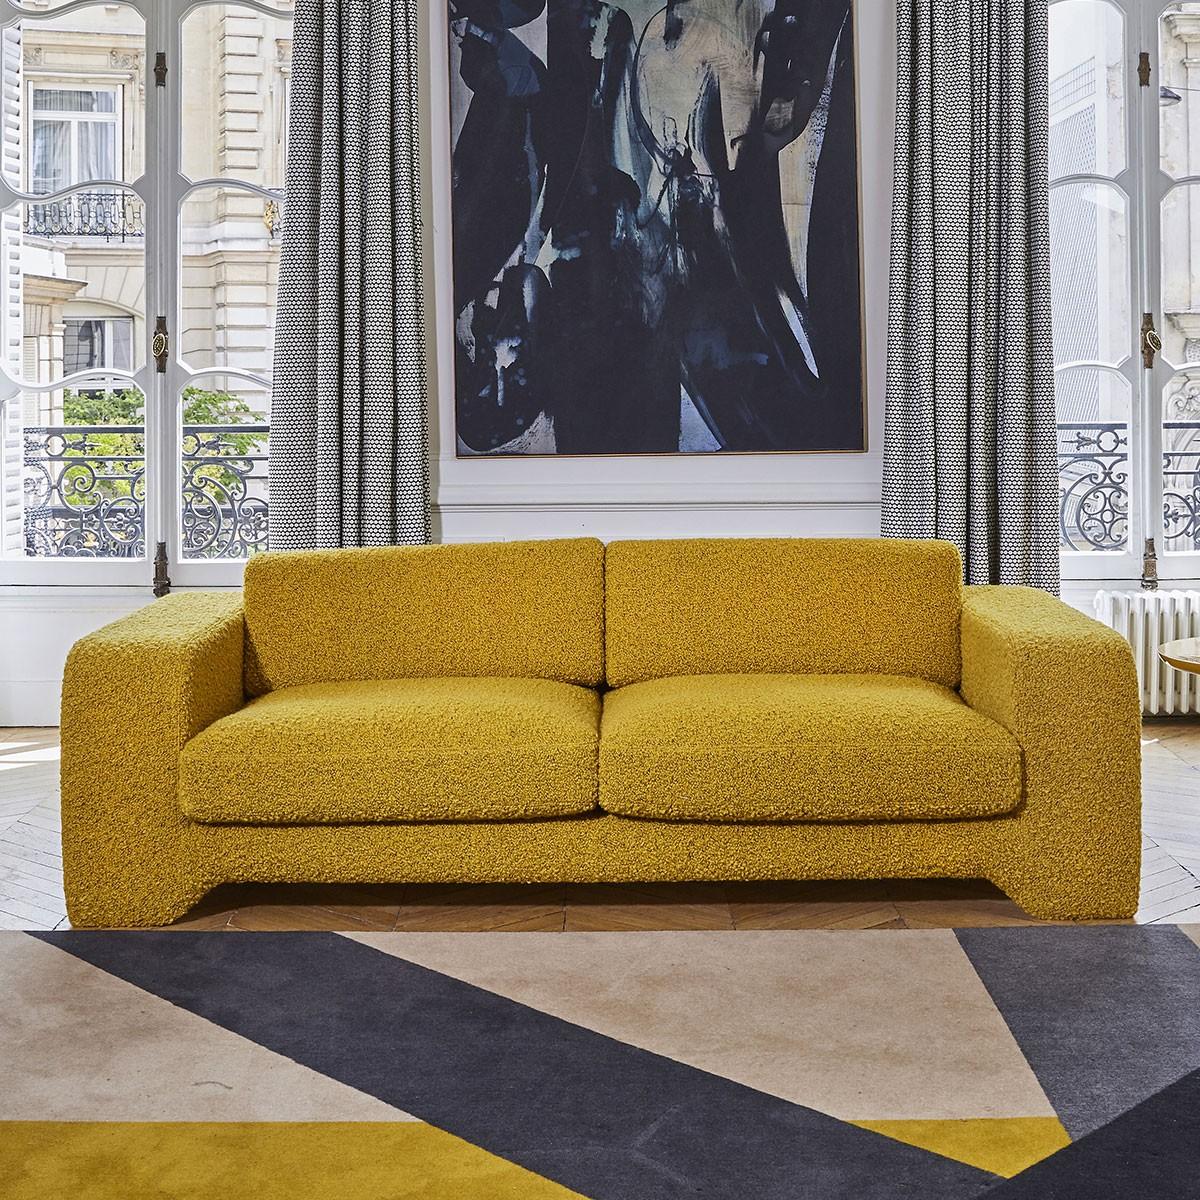 Popus Editions Giovanna 2.5 seater sofa in anthracite antwerp linen upholstery

Giovanna is a sofa with a strong profile. A sober, plush line, with this famous detail that changes everything, so as not to forget its strength of character and this